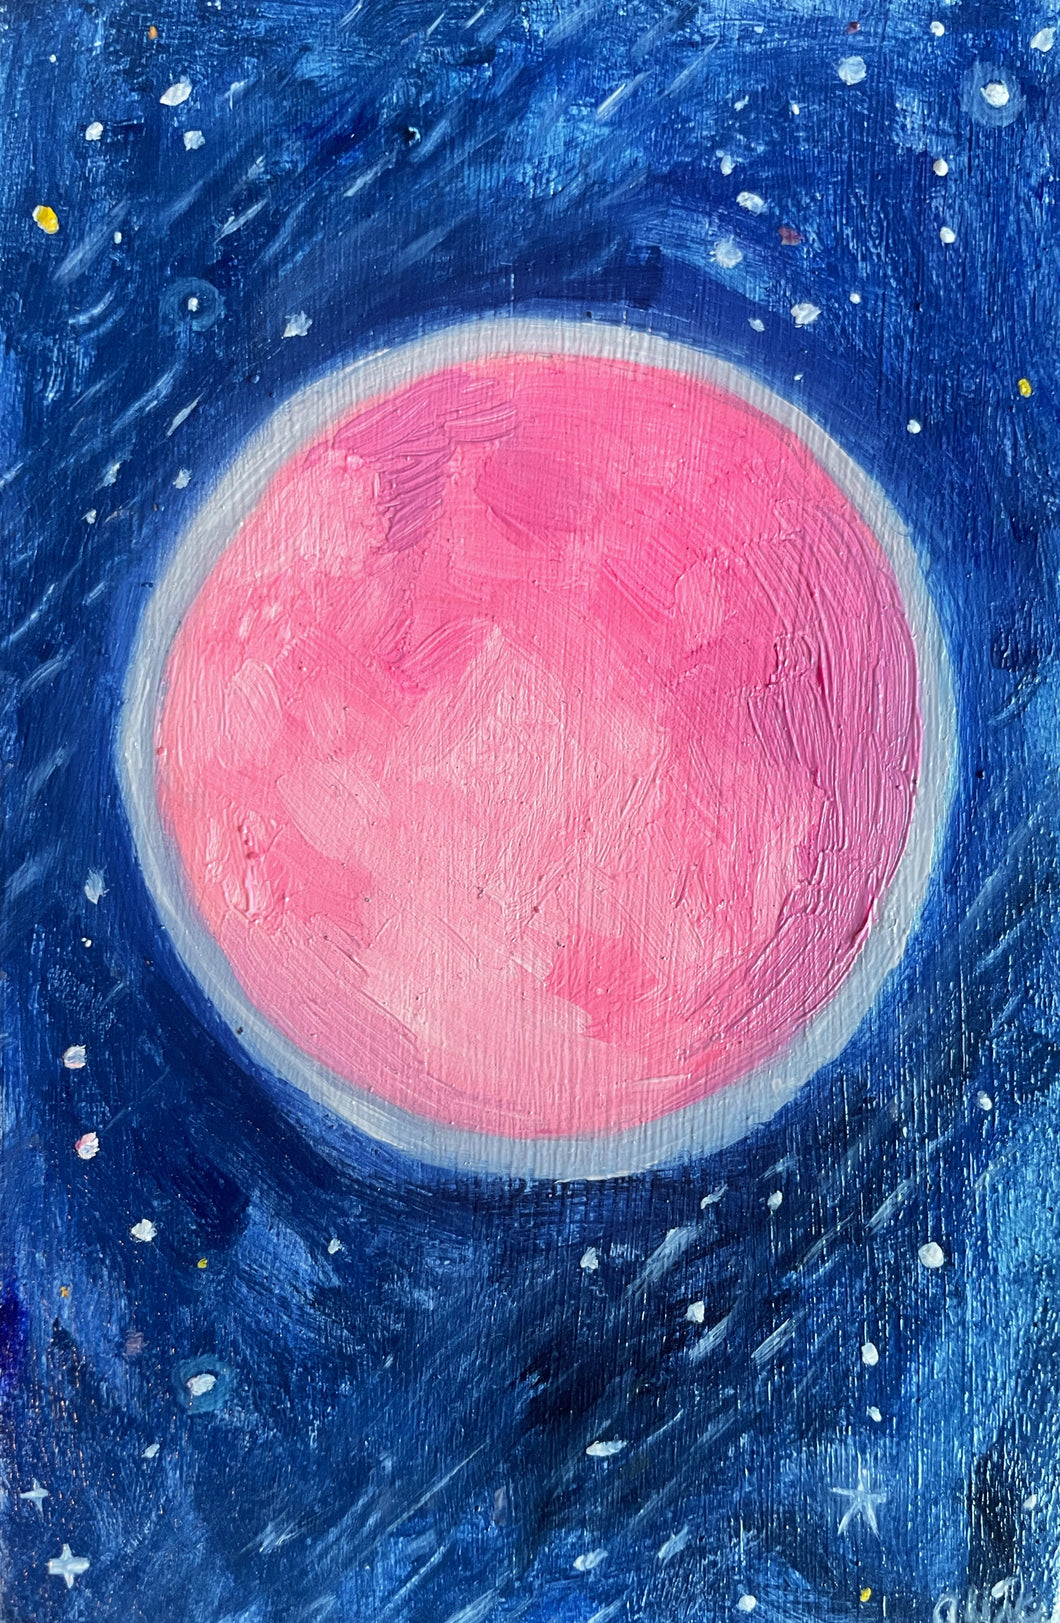 Pink moon with lyrid meteor shower